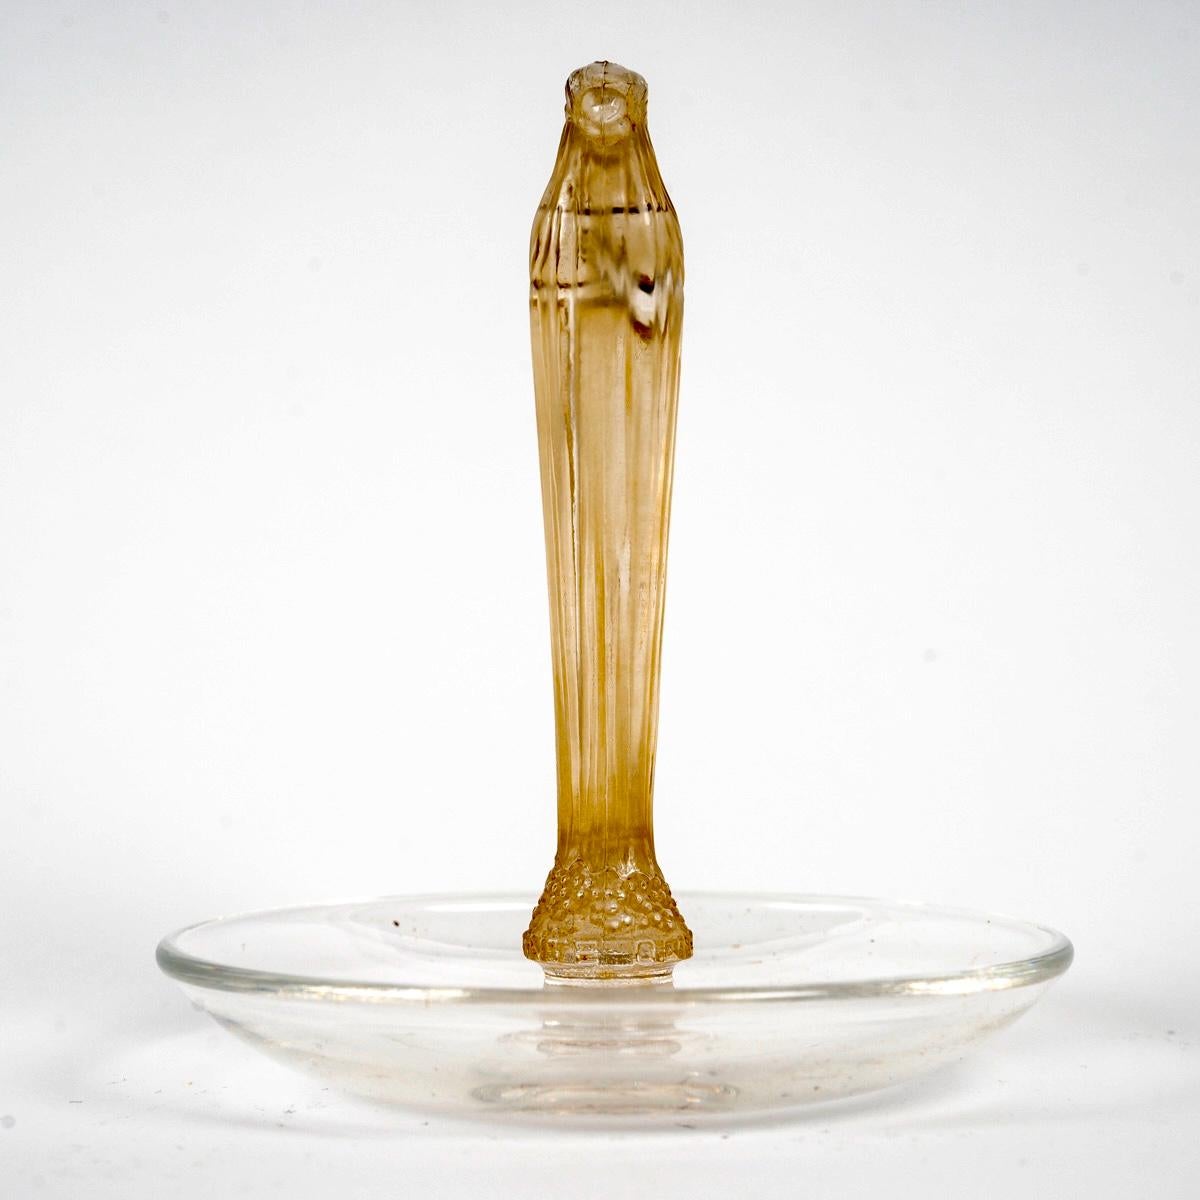 French 1925 René Lalique Asthray Pintray Clos Sainte Odile Glass with Sepia Patina For Sale